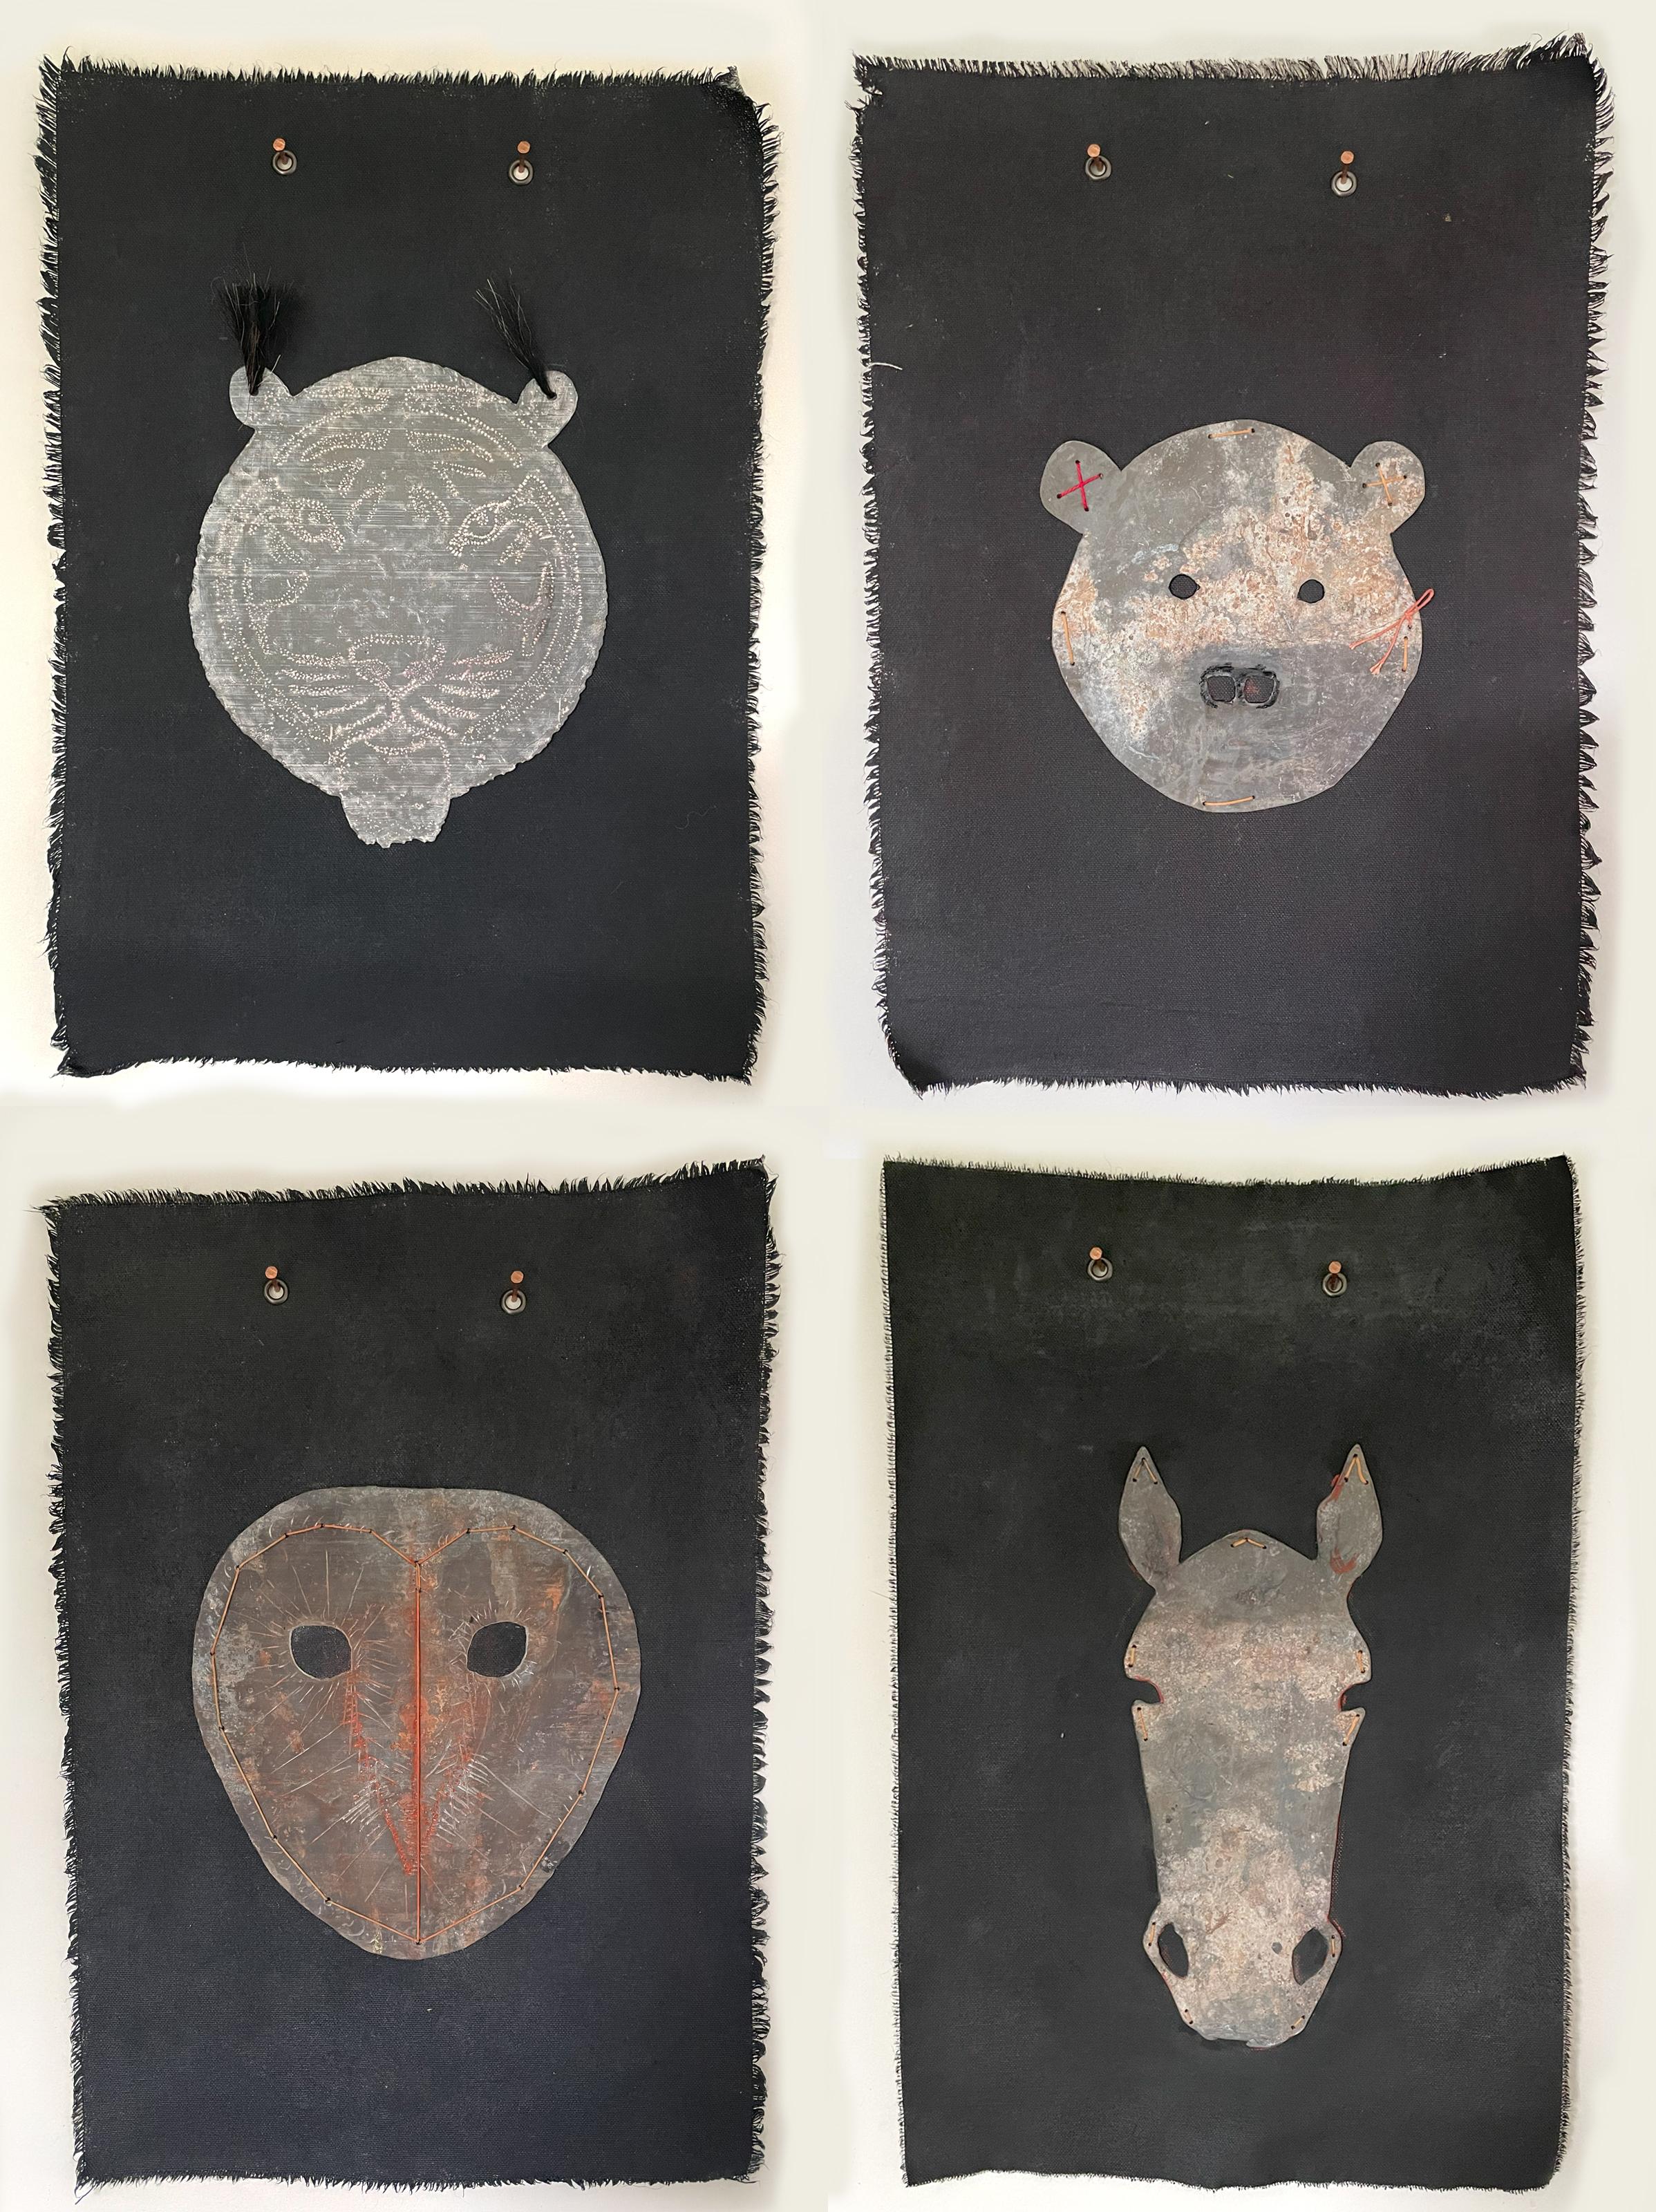 Four Fiber Wall Hangings: 'The Masks We Wear Series, Tiger, Teddy, Owl, Horse'